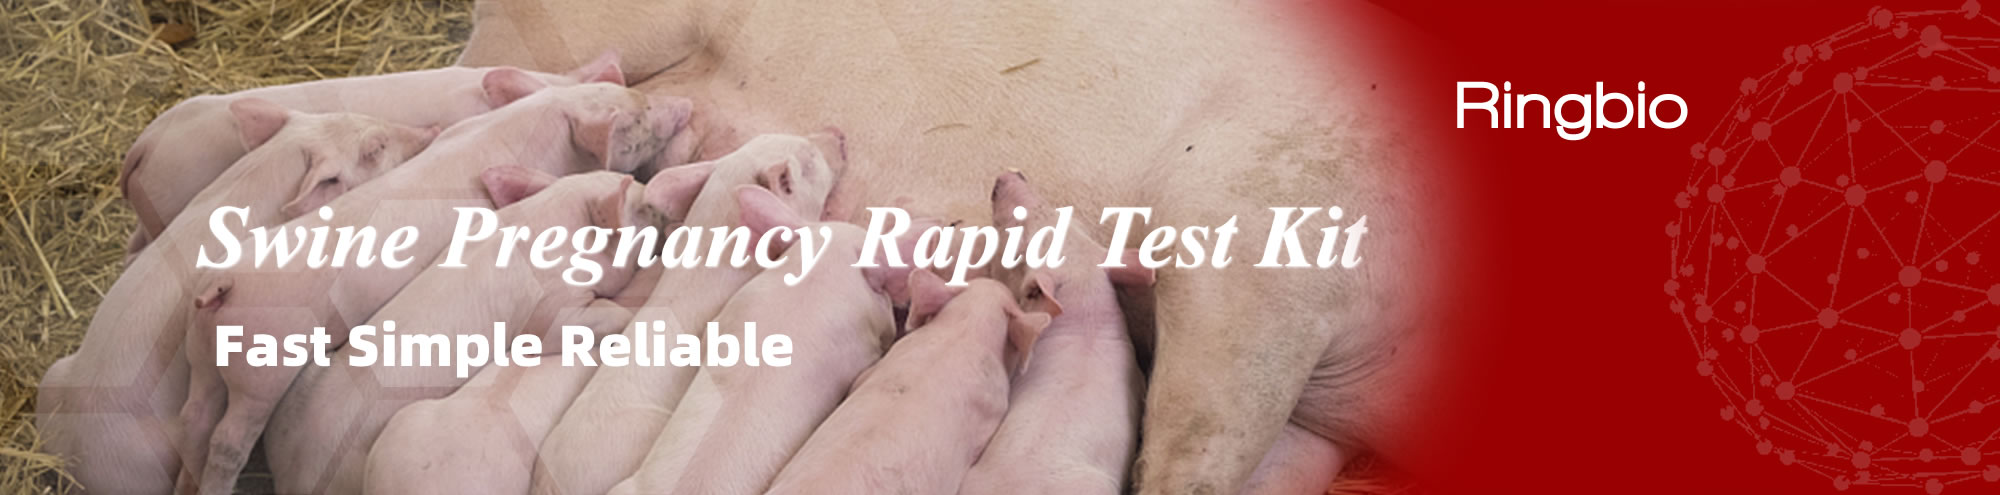 Pig pregnancy rapid test kit from Ringbio, 10min to detect pig pregnancy